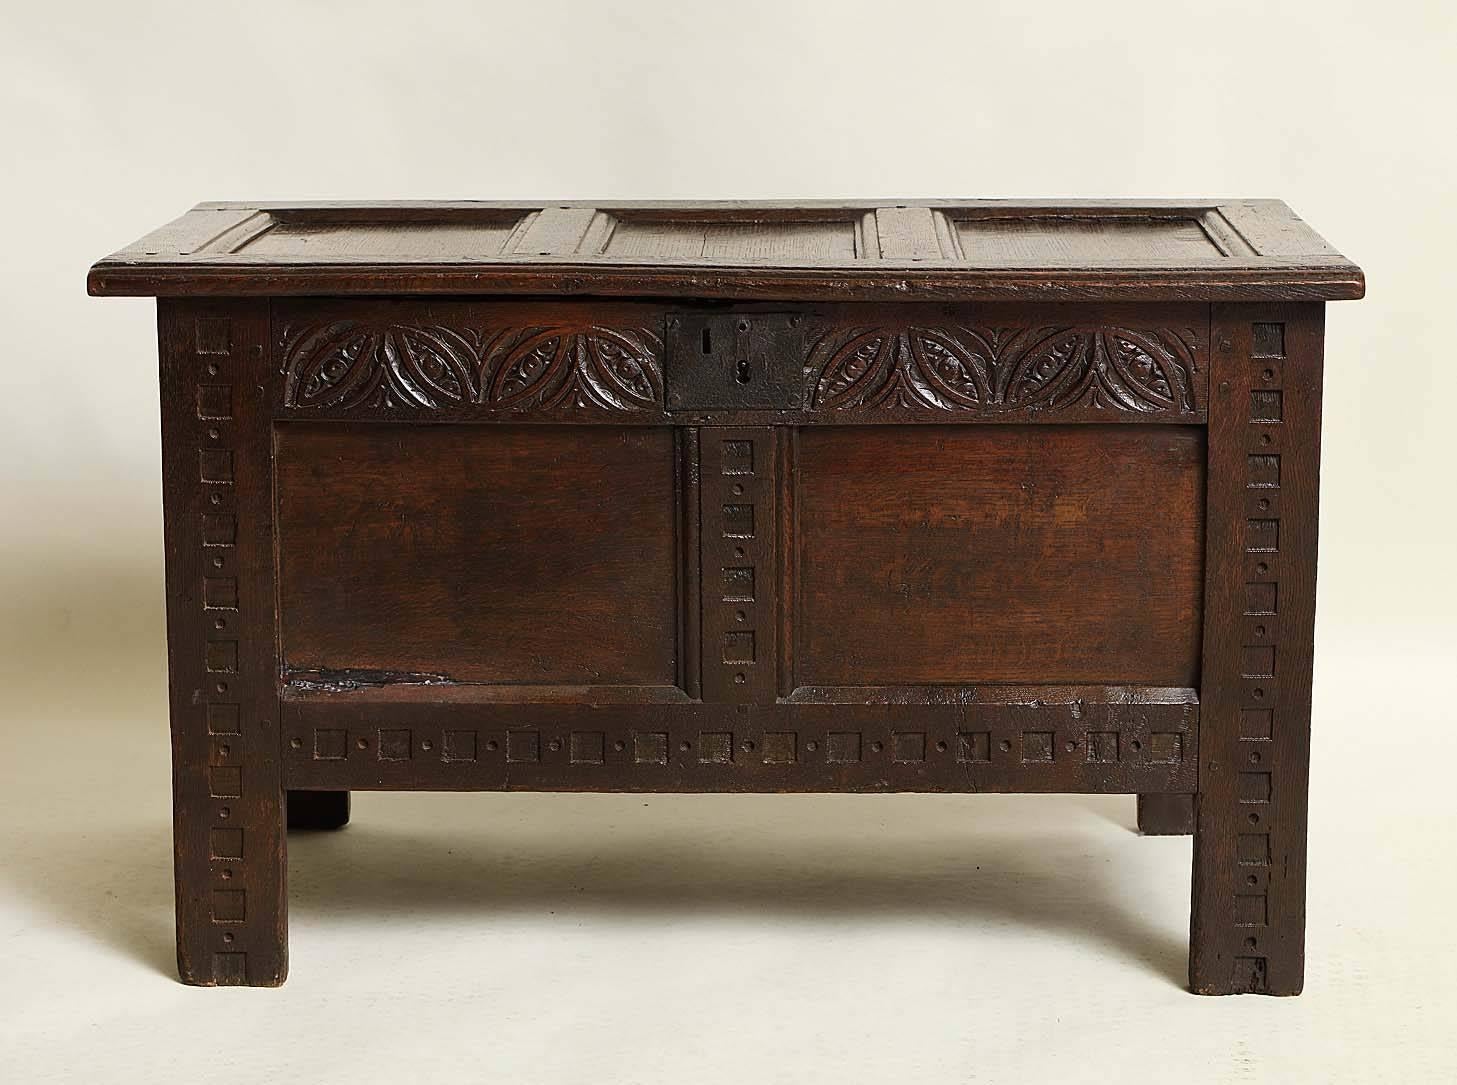 Good 17th century English oak coffer, probably Gloucestershire or West Country, the three panel top with molded rails and stiles, the font richly carved rails and stiles, having original lock plate, the whole with very rich color and of pleasing